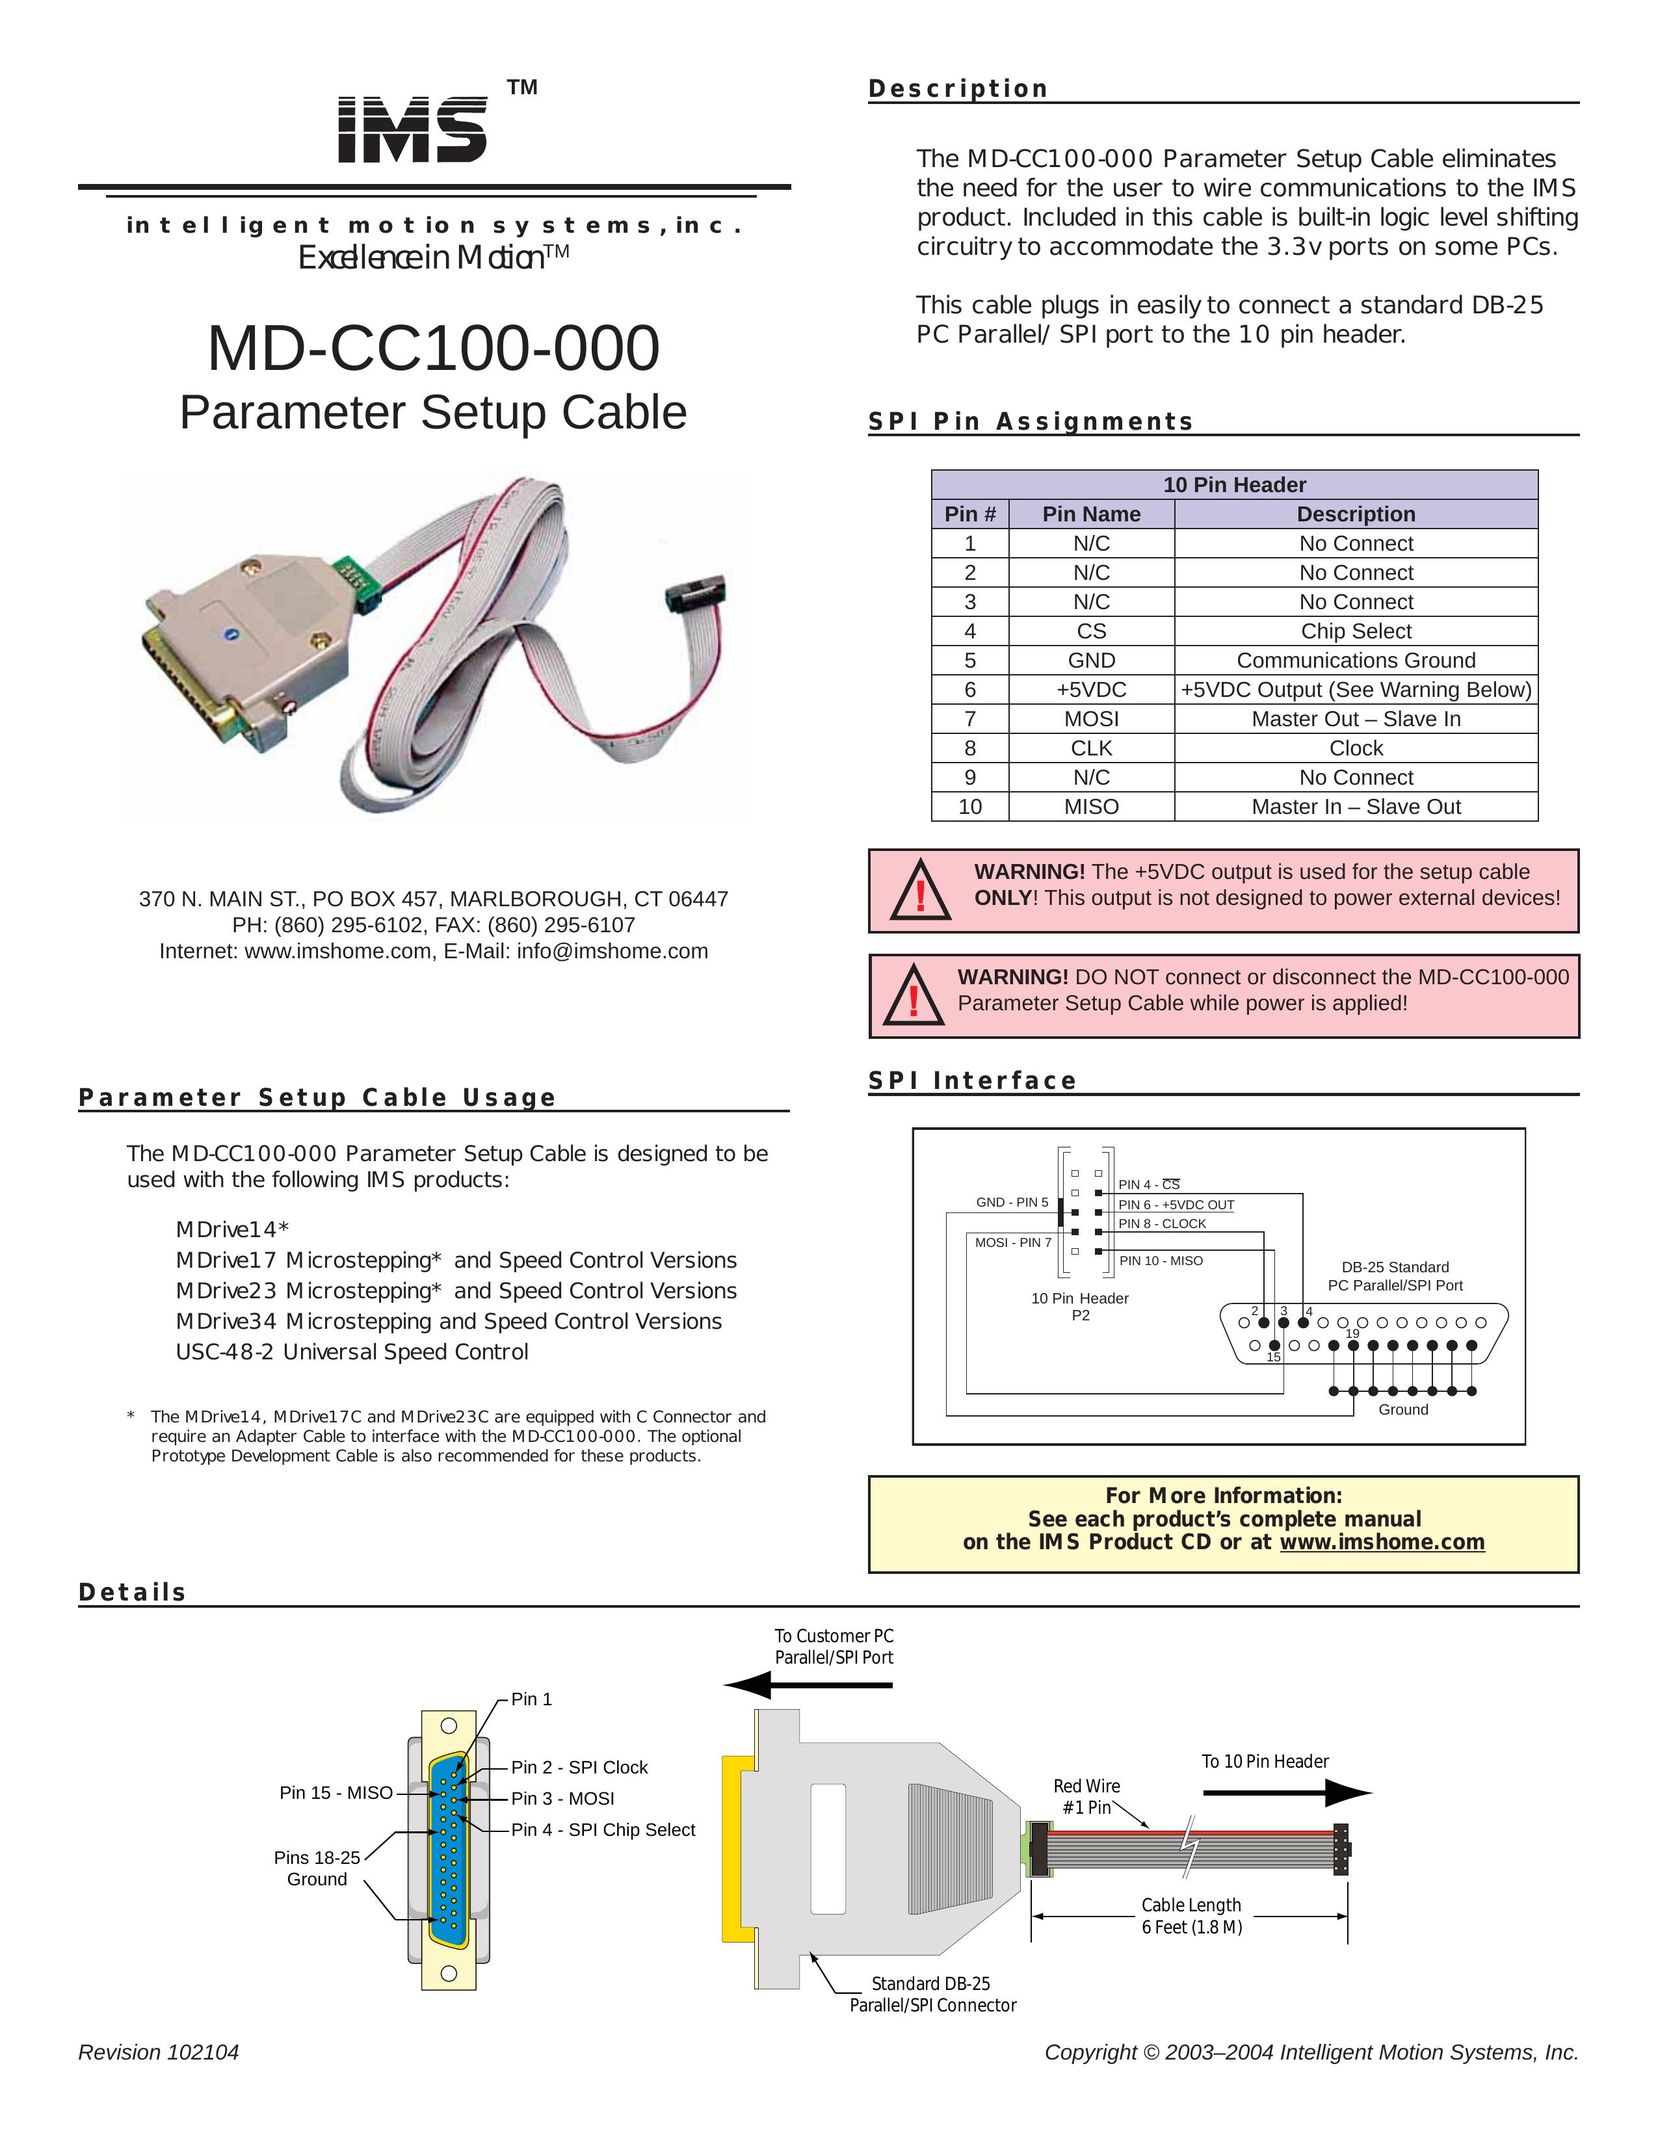 Intelligent Motion Systems MD-CC100-000 Stereo System User Manual